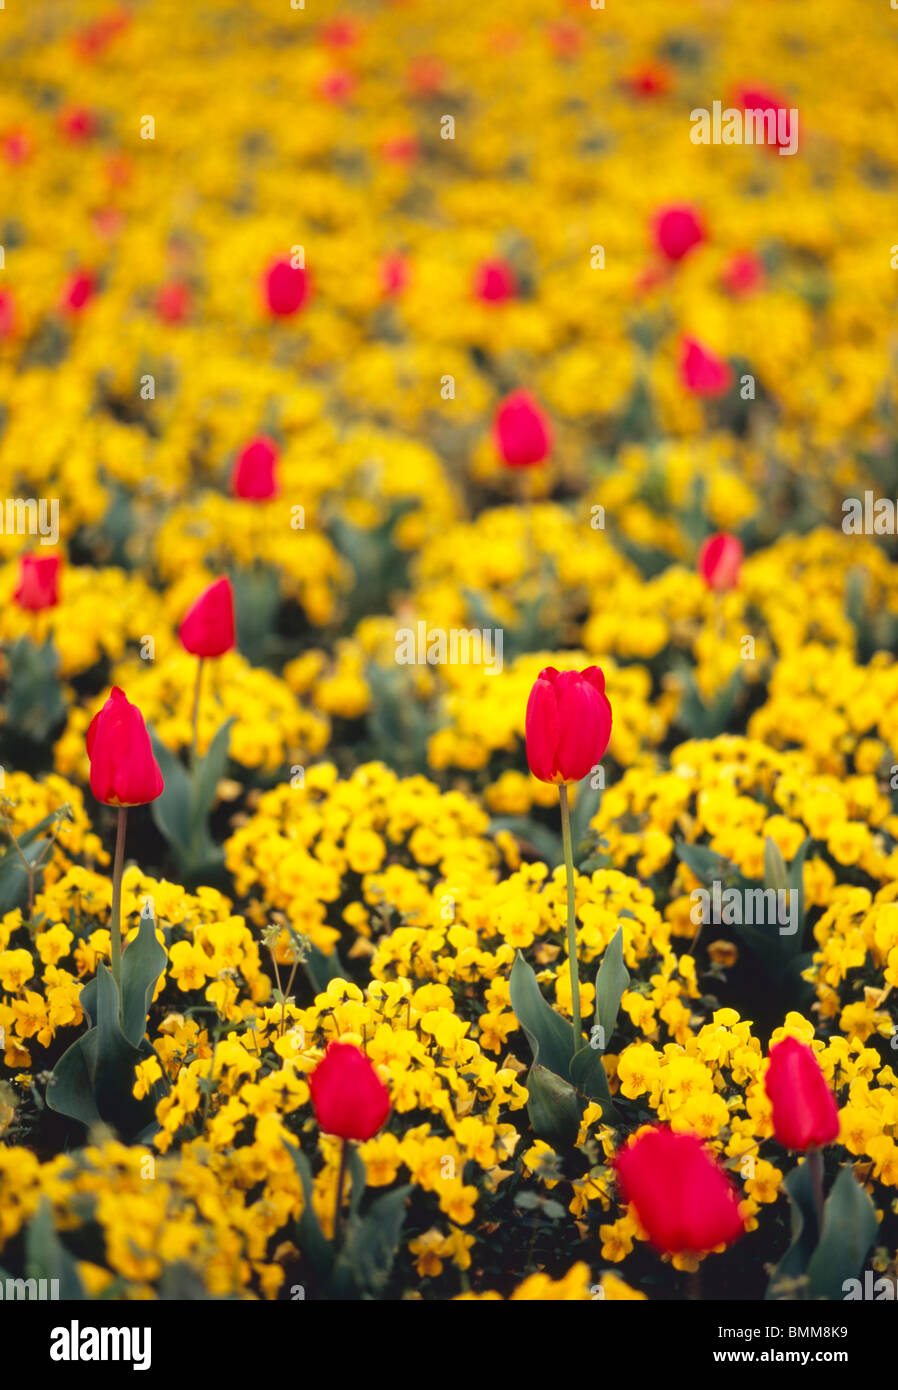 Red tulips in field of yellow flowers Stock Photo